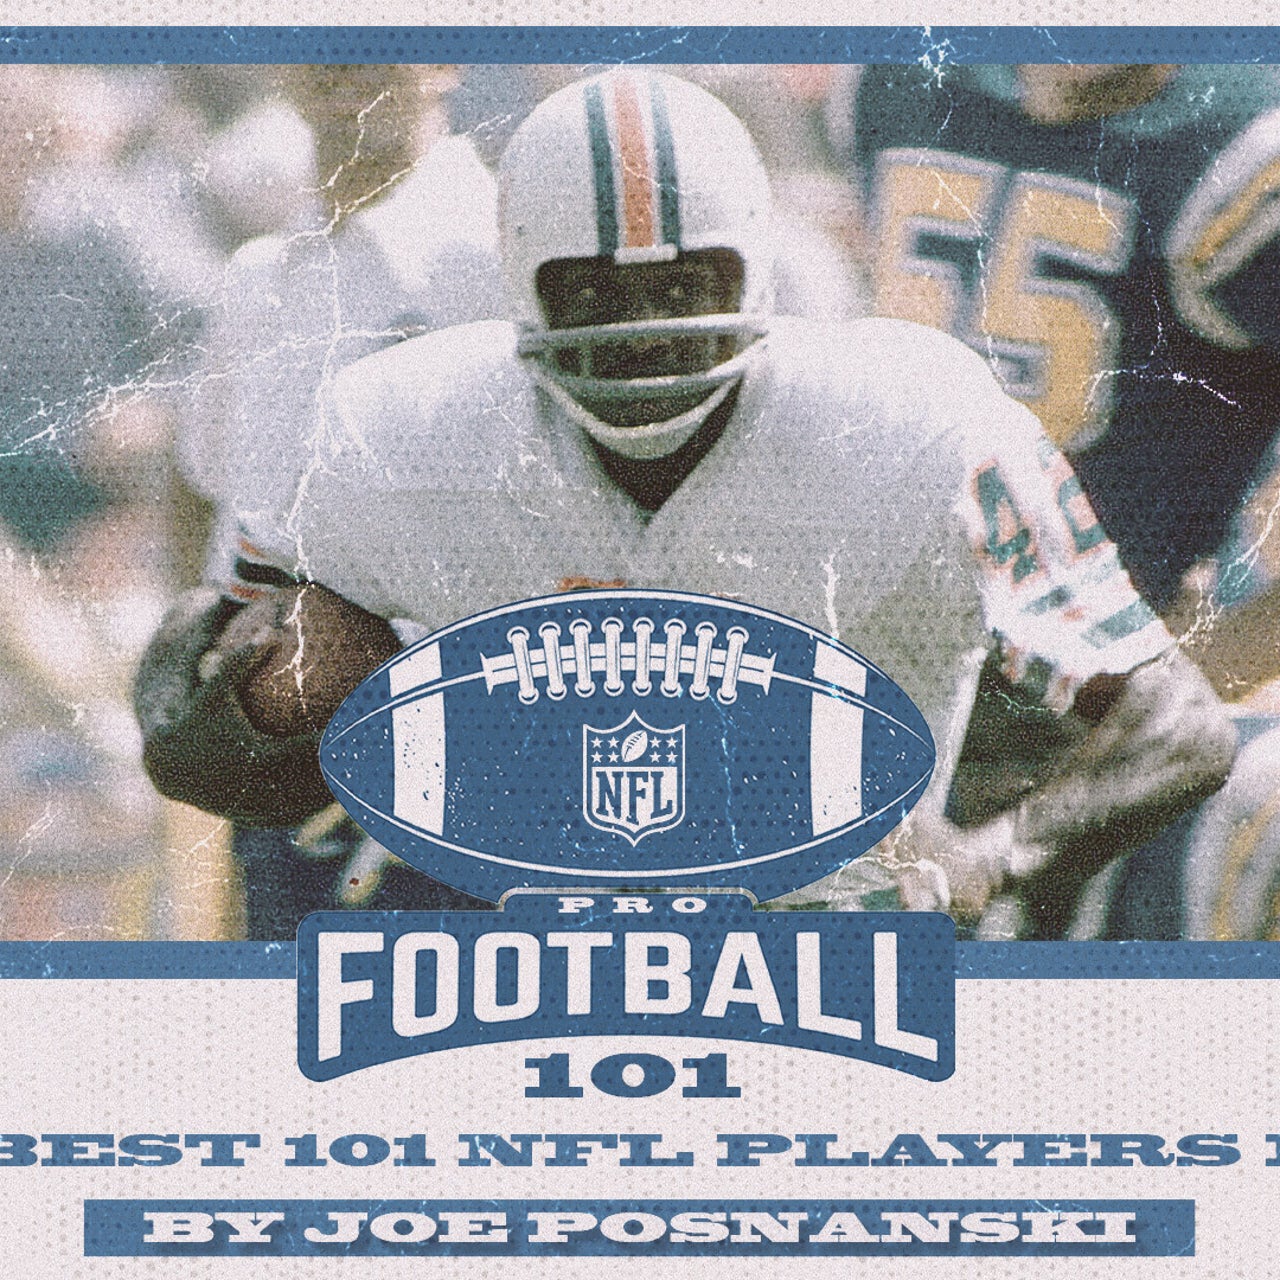 Paul Warfield: The Most Underrated WR in NFL HISTORY??? 